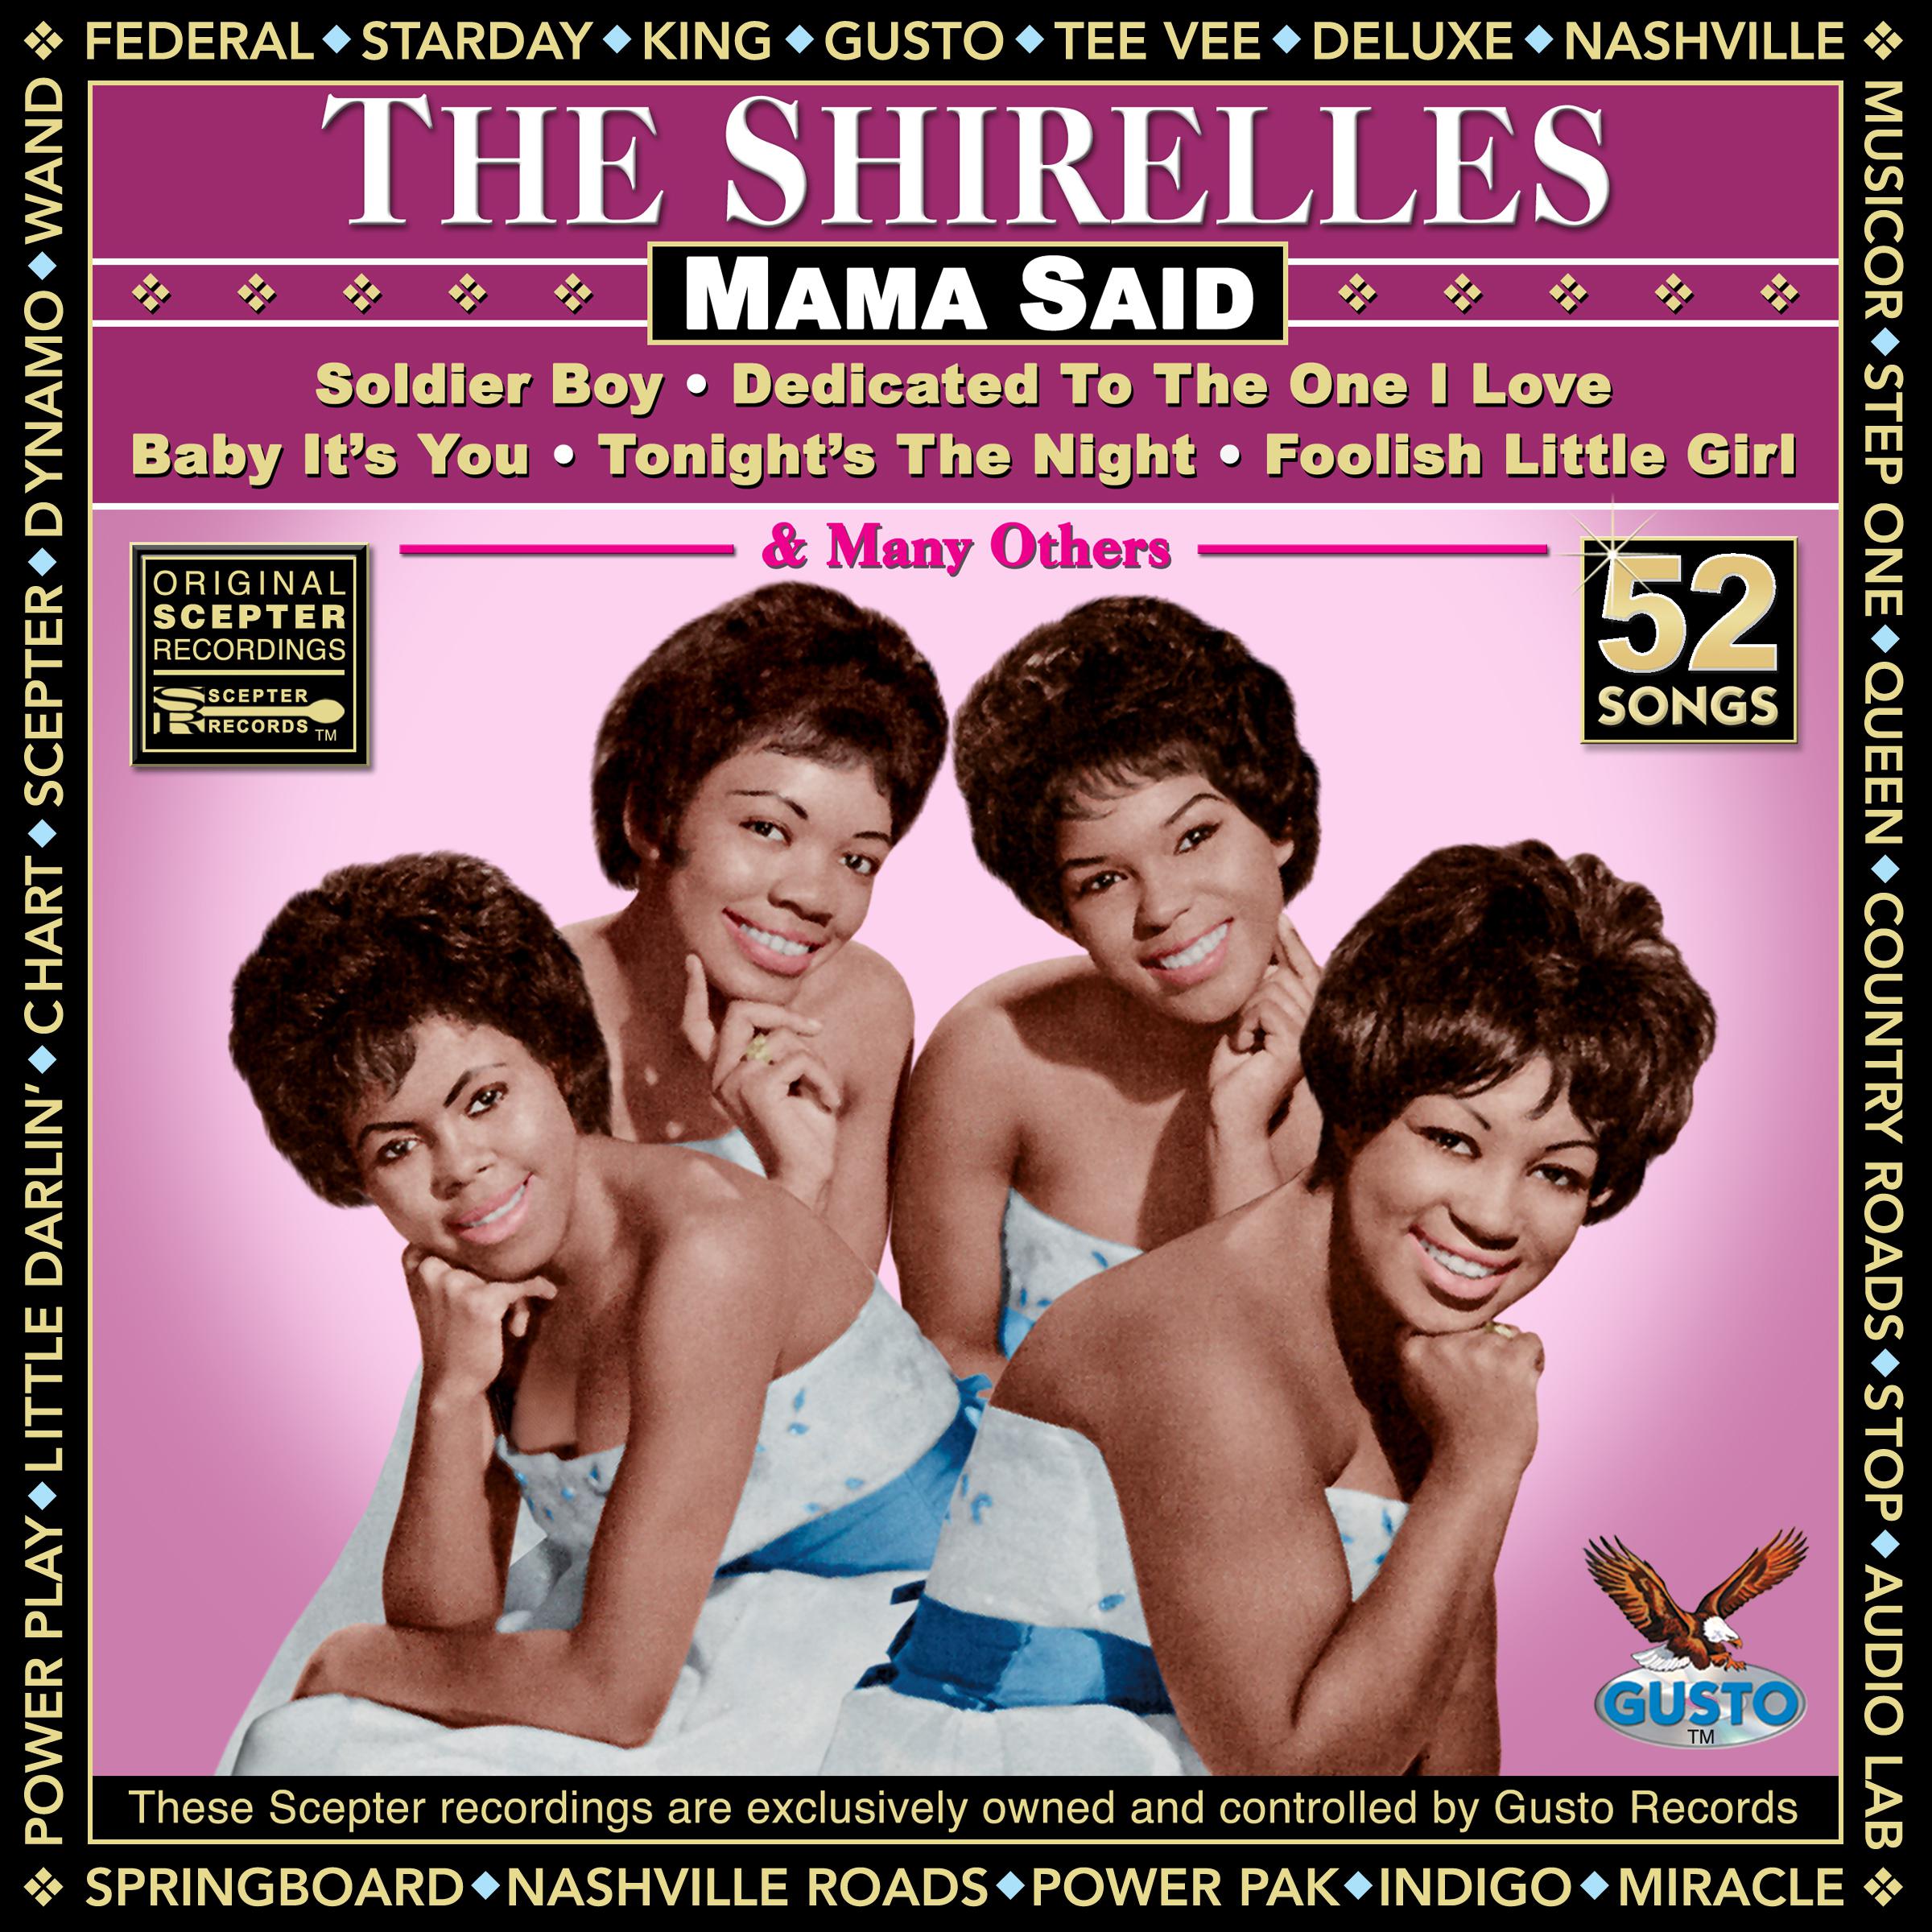 The Shirelles - Johnny On My Mind (Original Scepter Records Recording)